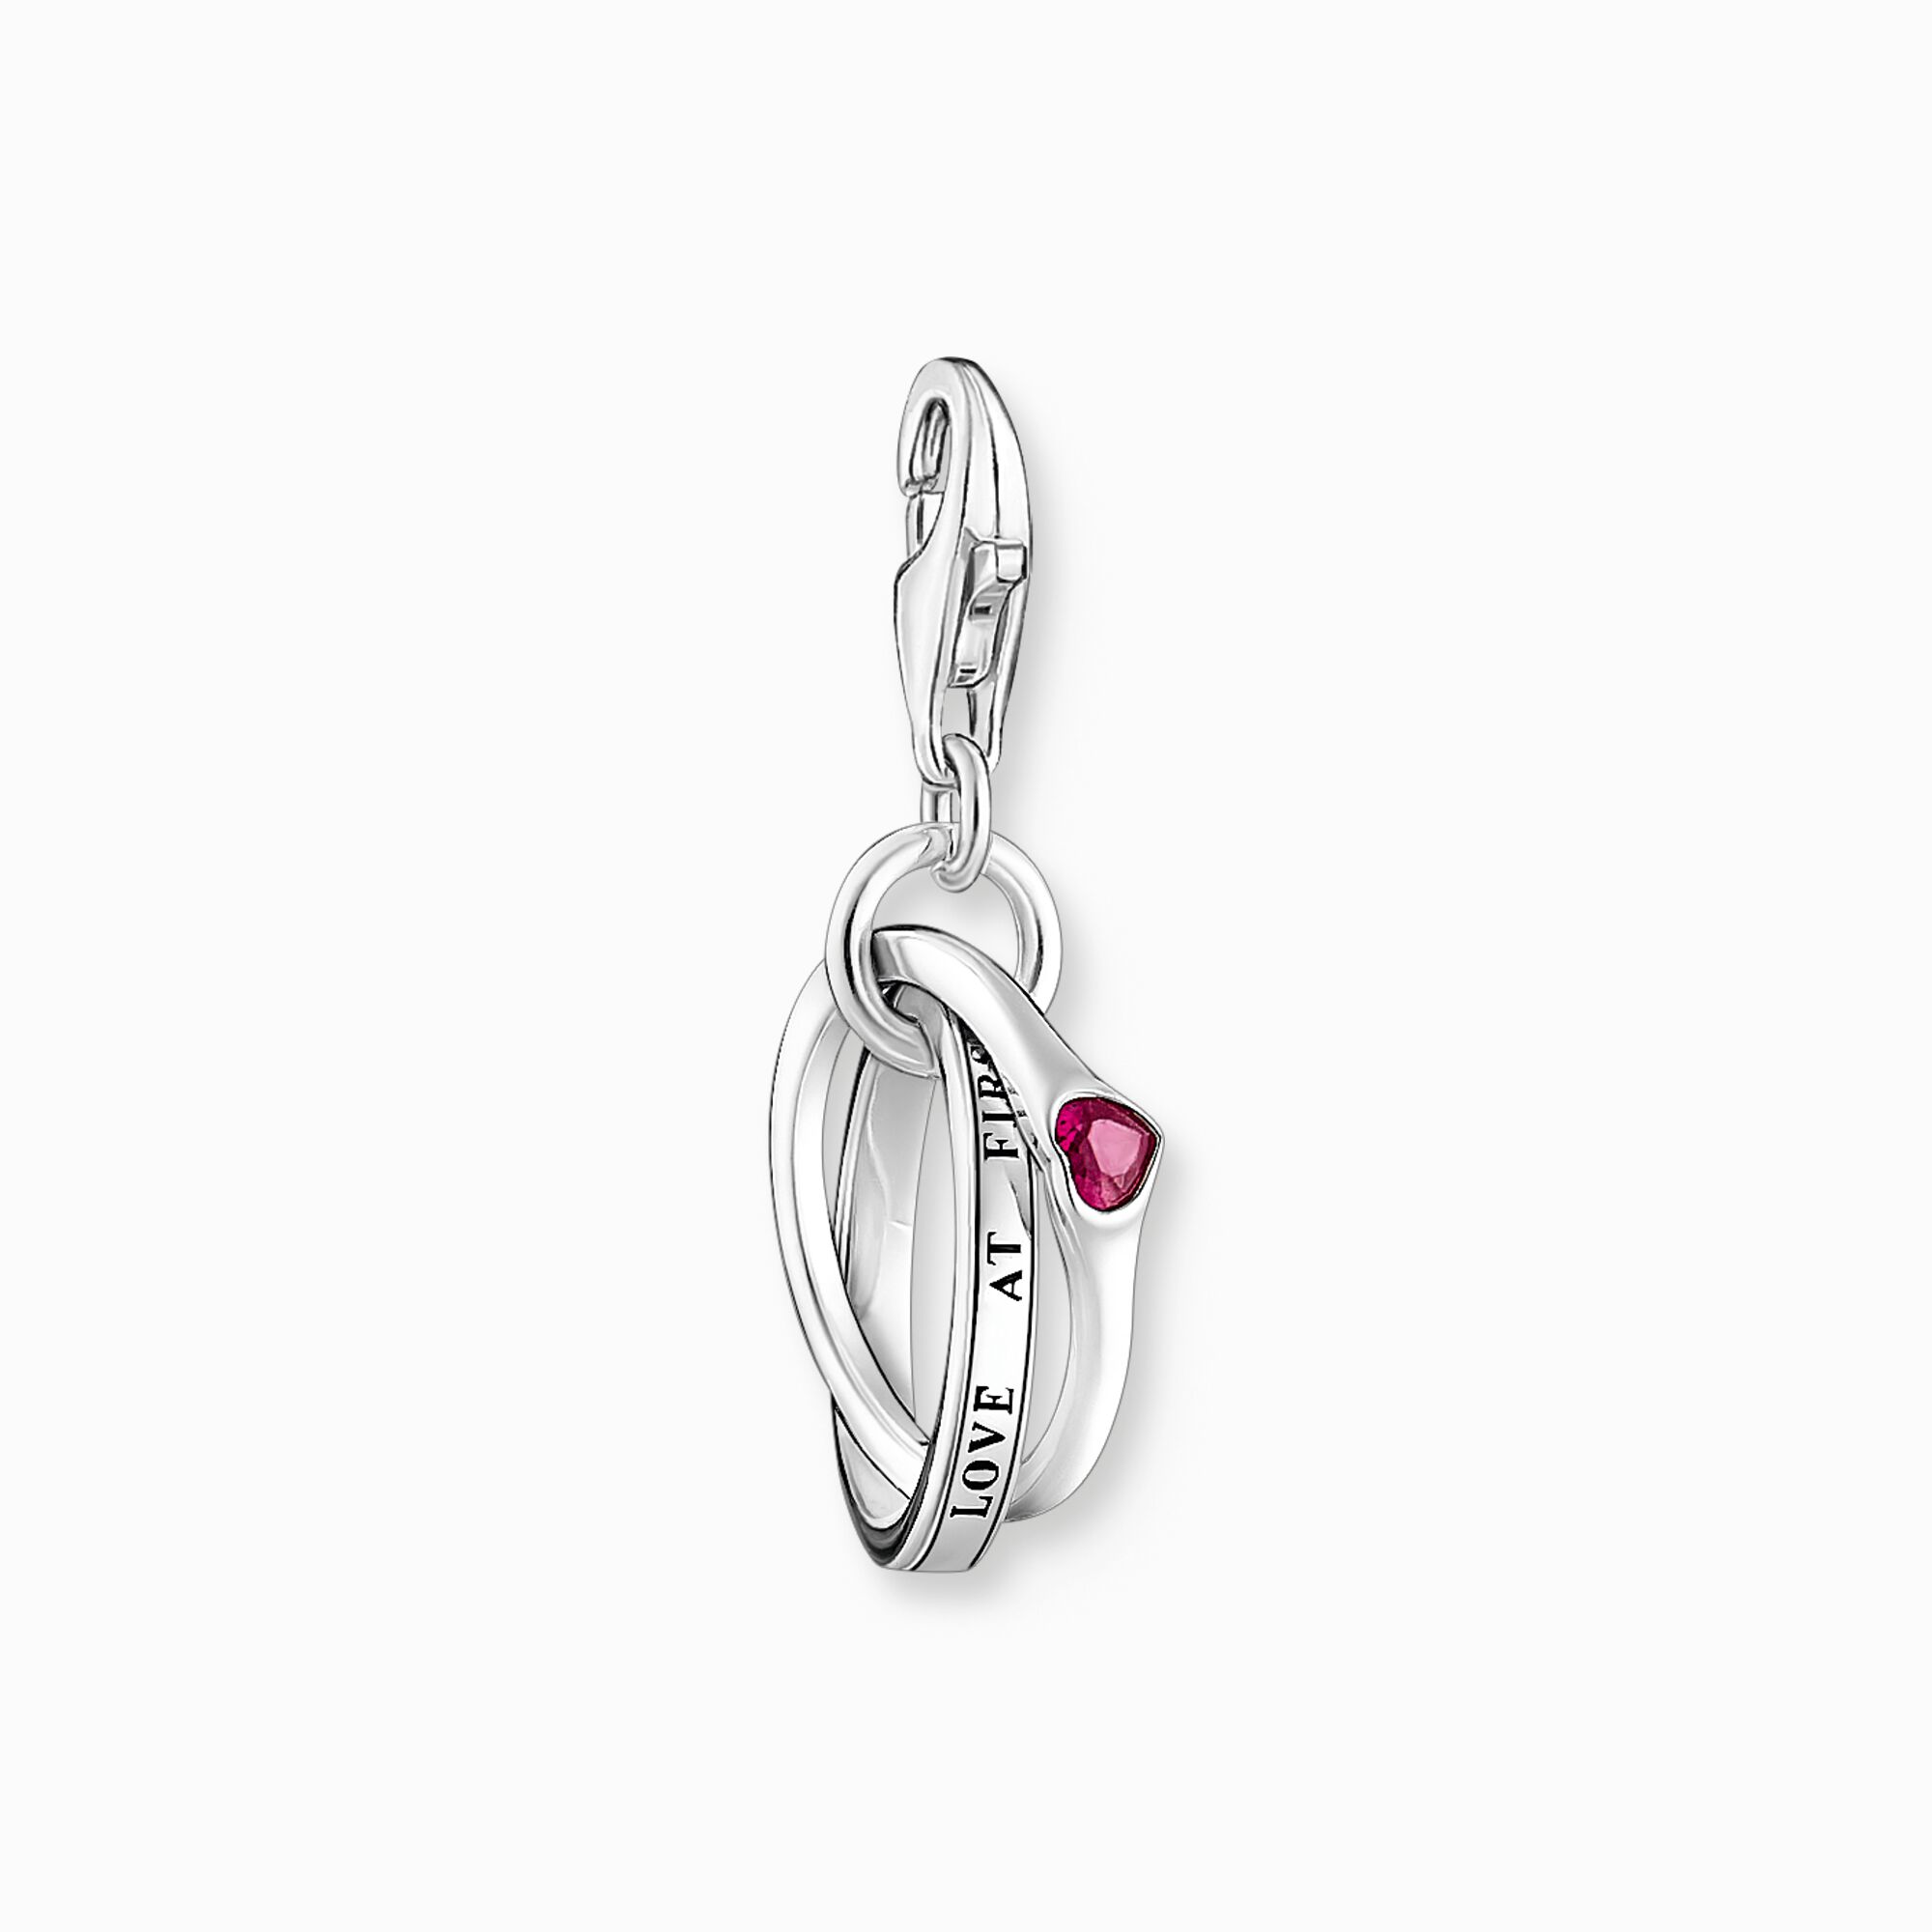 Charm-Anhänger Silber THOMAS mit rotem Together-Ring | SABO Stein